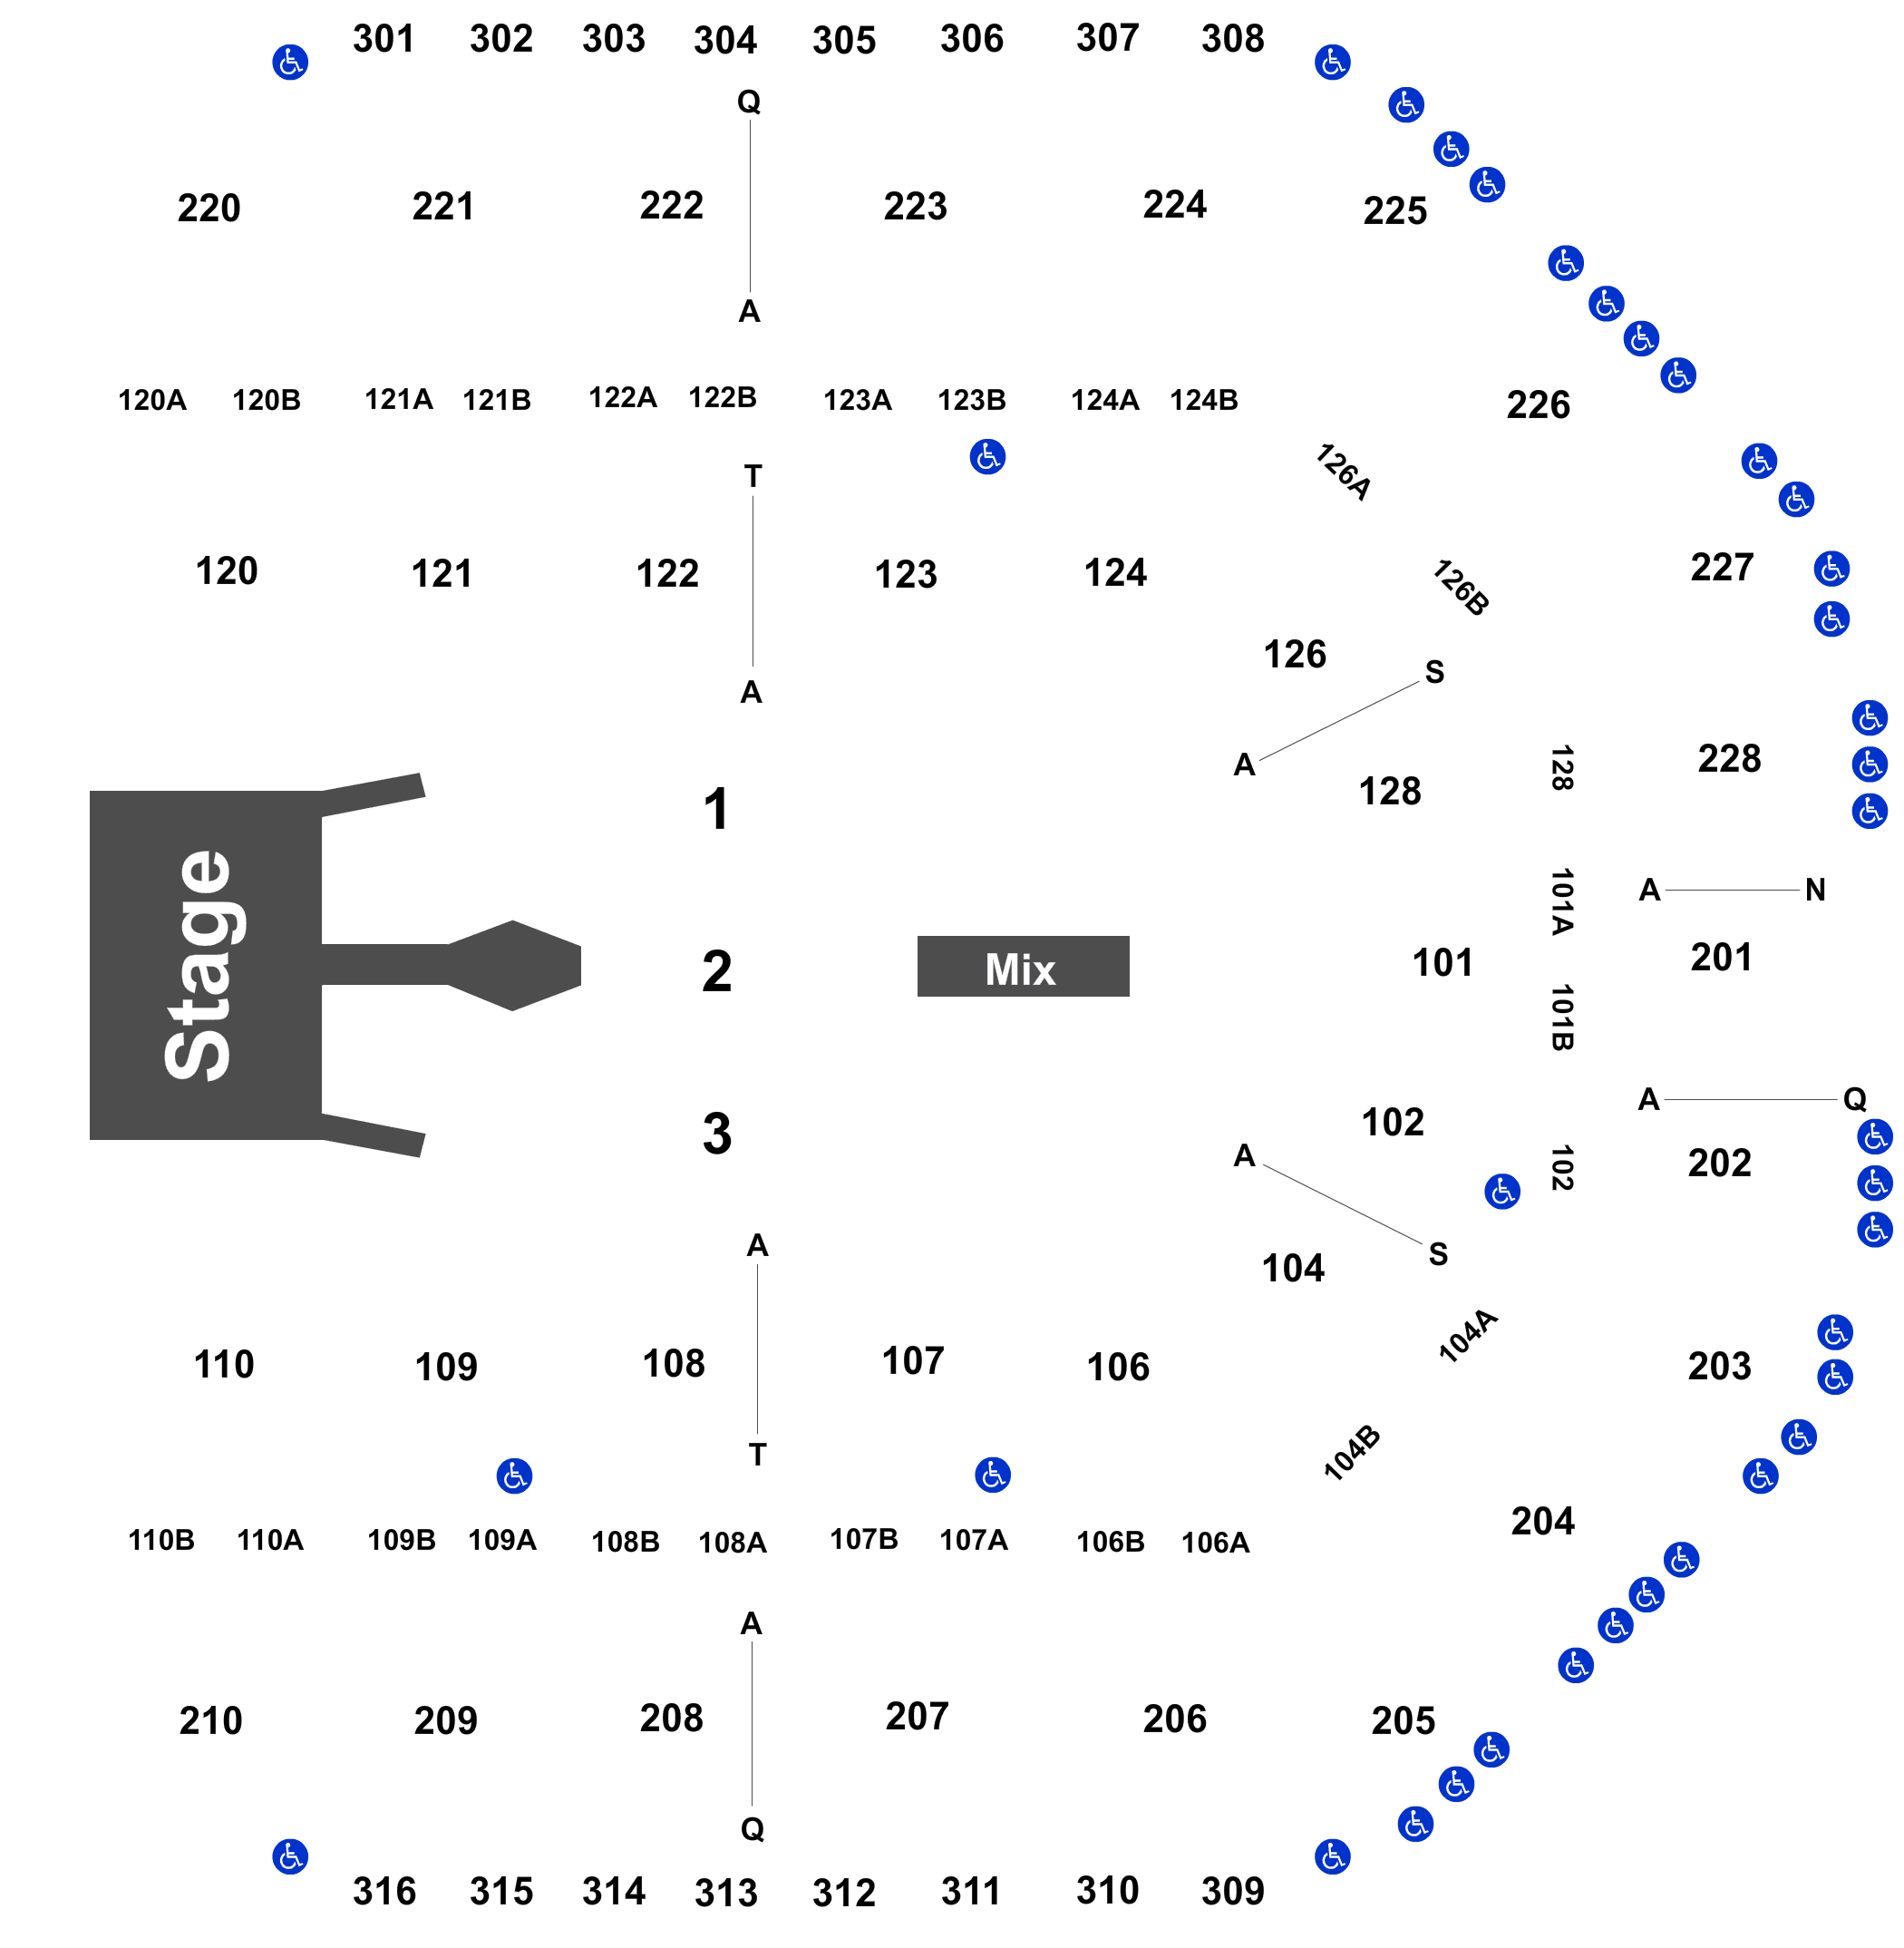 van andel arena seating chart section 205